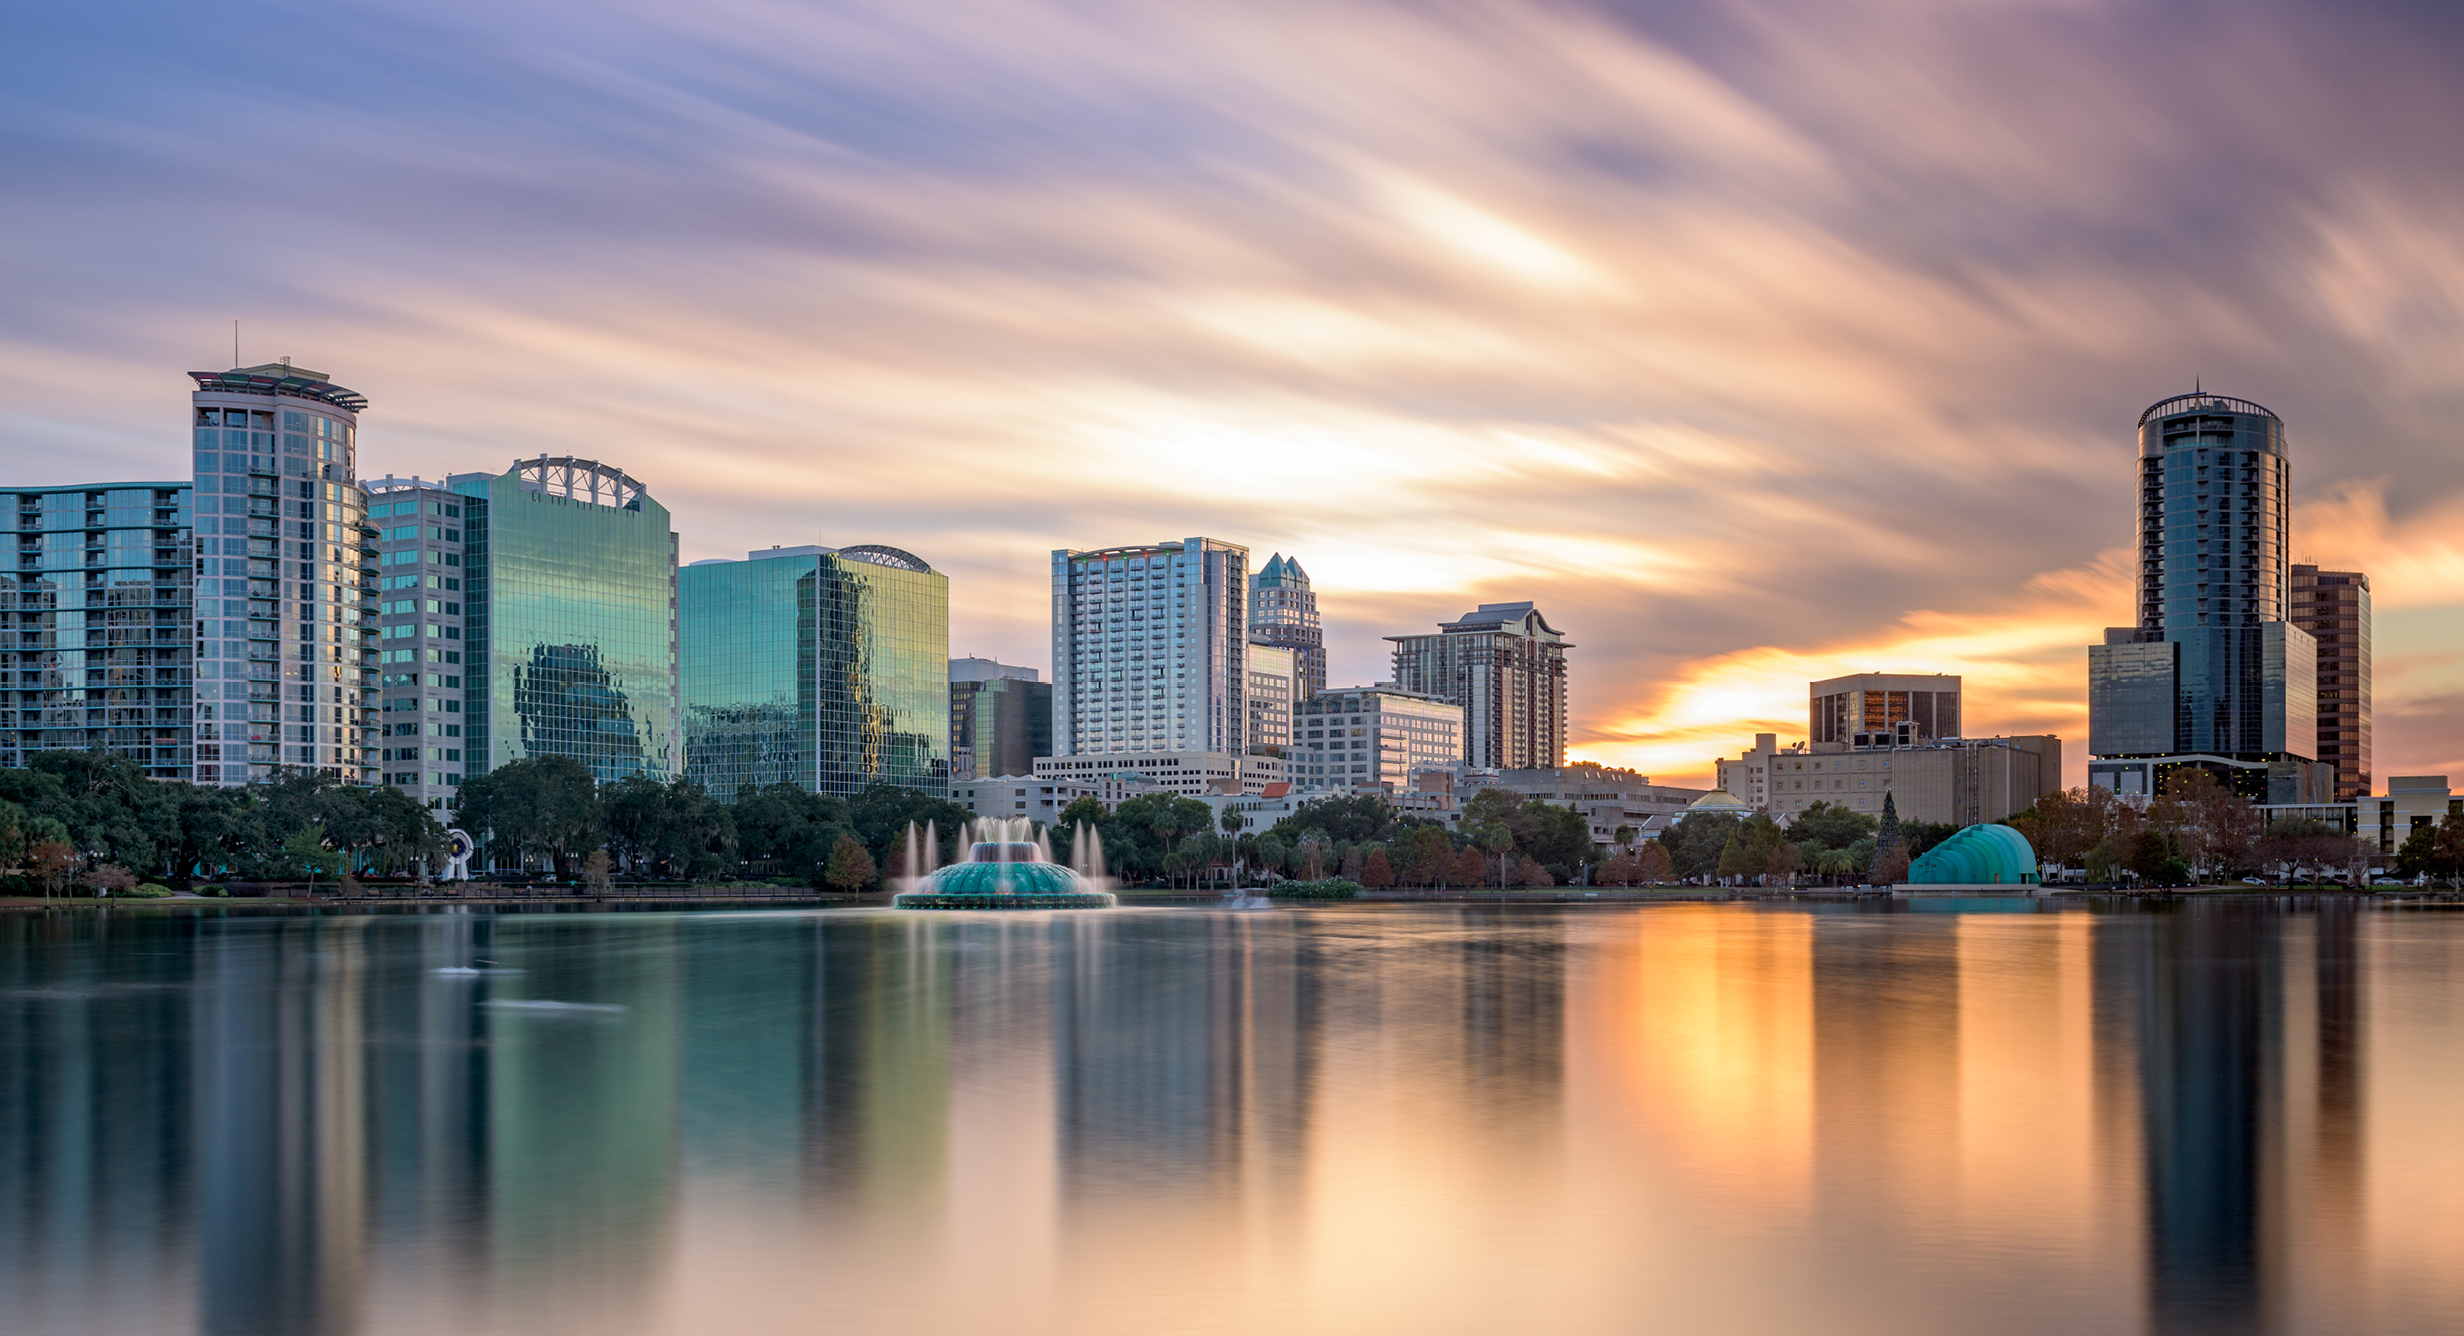 Orlando is second most sinful city in the U.S., says 